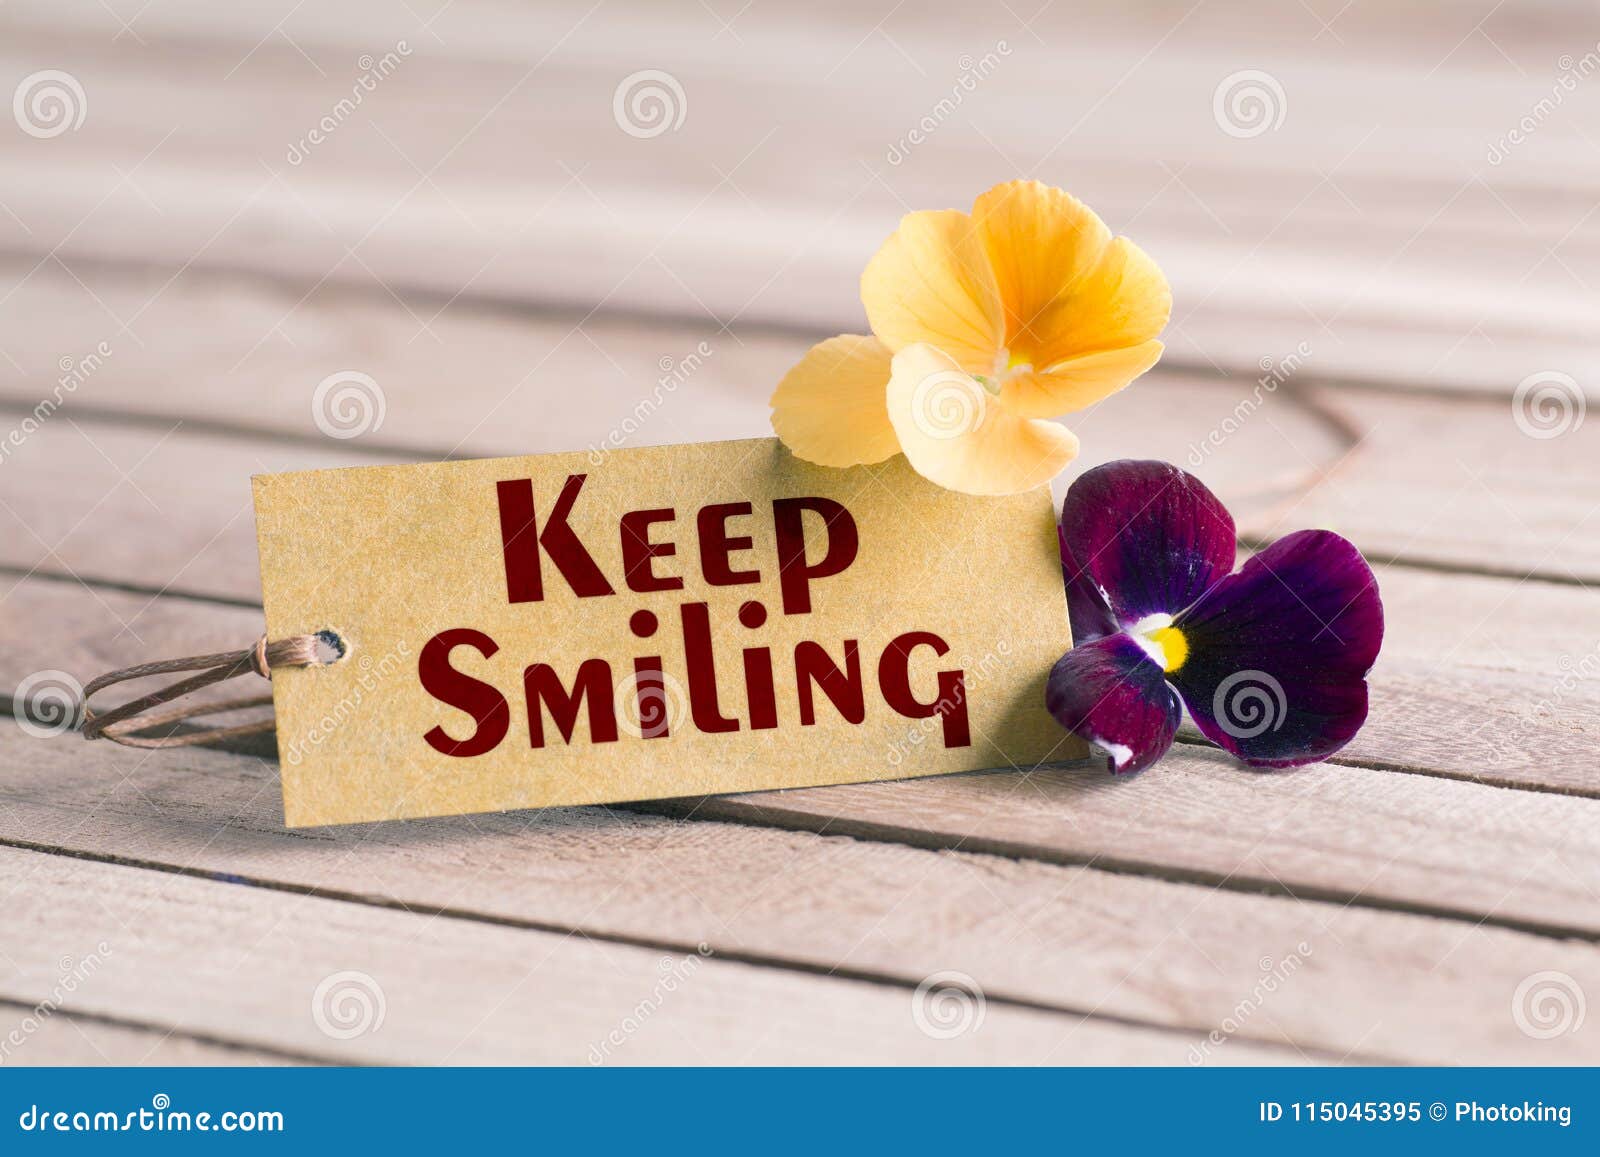 Keep smiling tag stock image. Image of word, smiling - 115045395